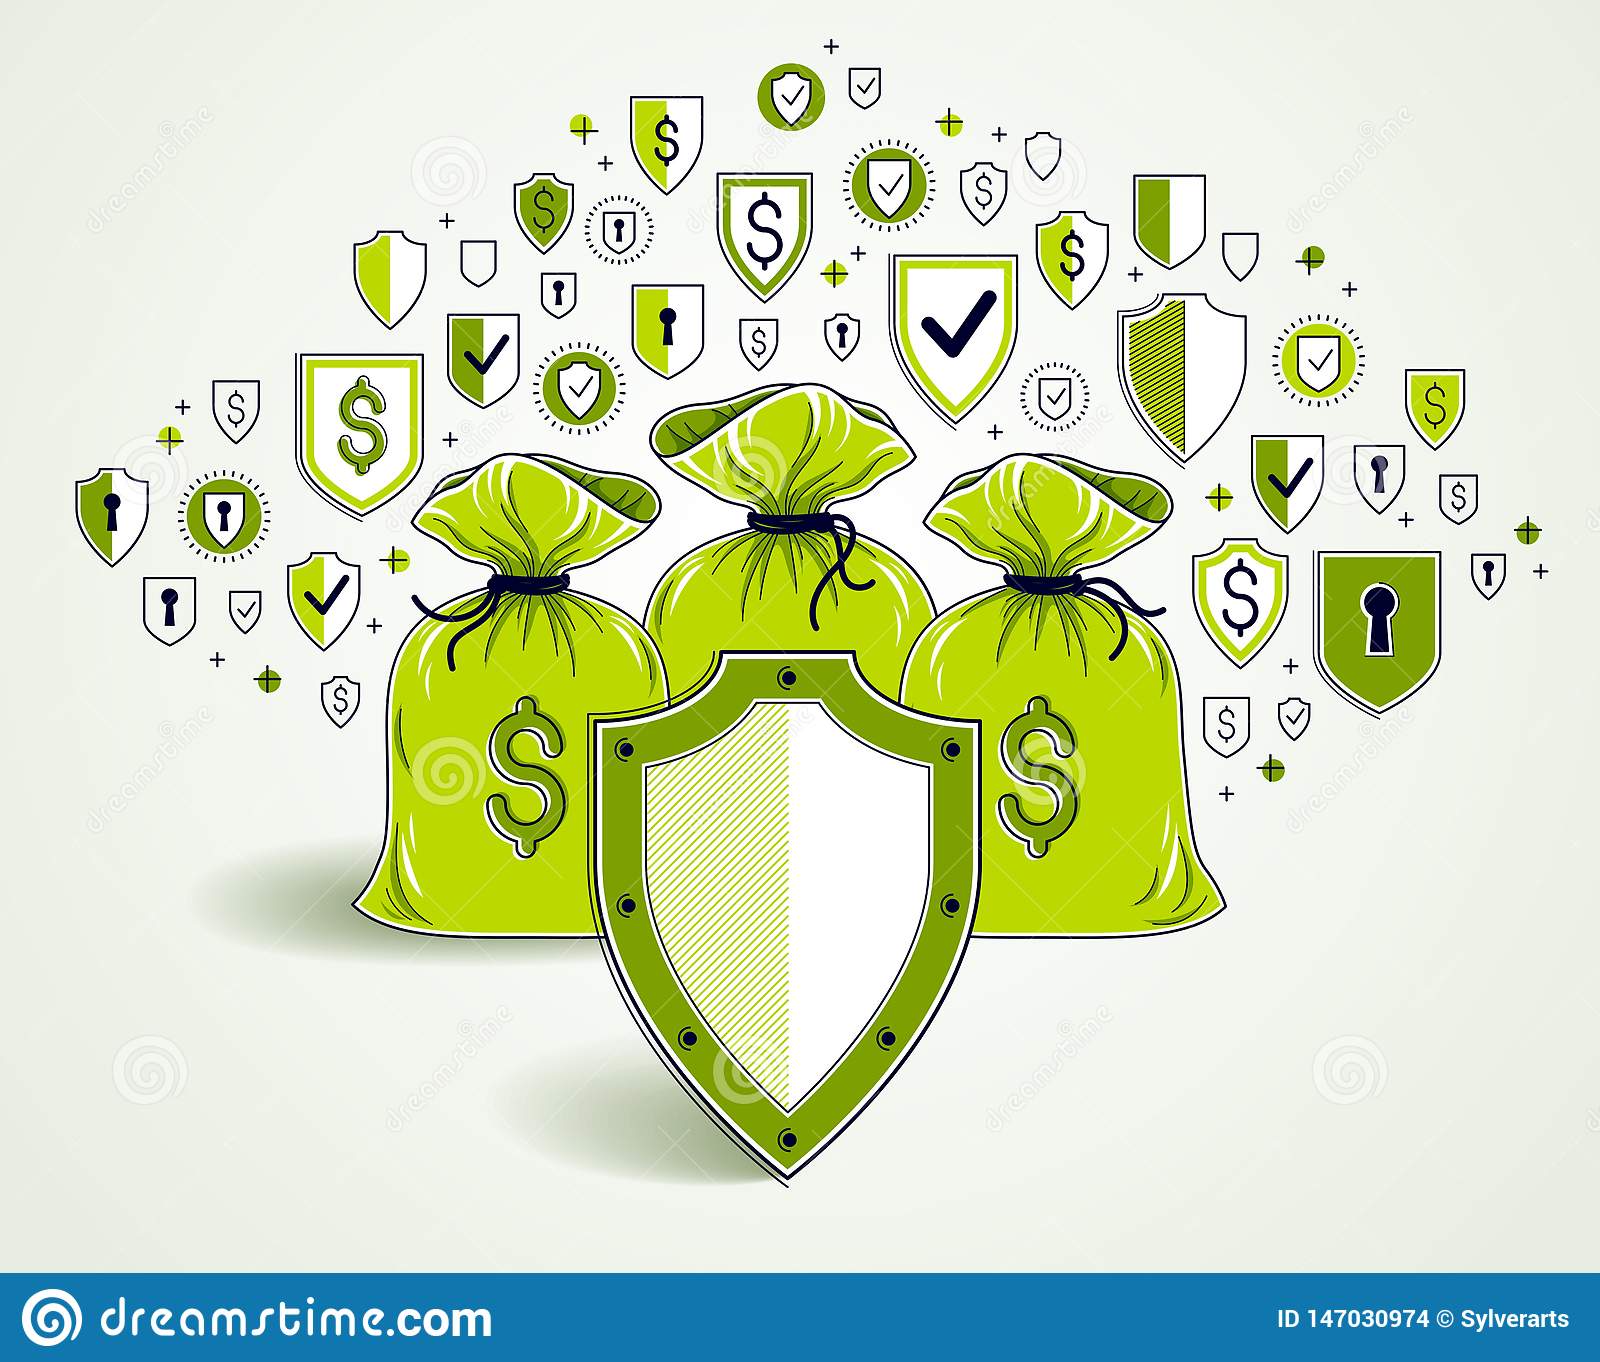 Shield Over 3 Money Bags, Financial Security Concept, Business And ...